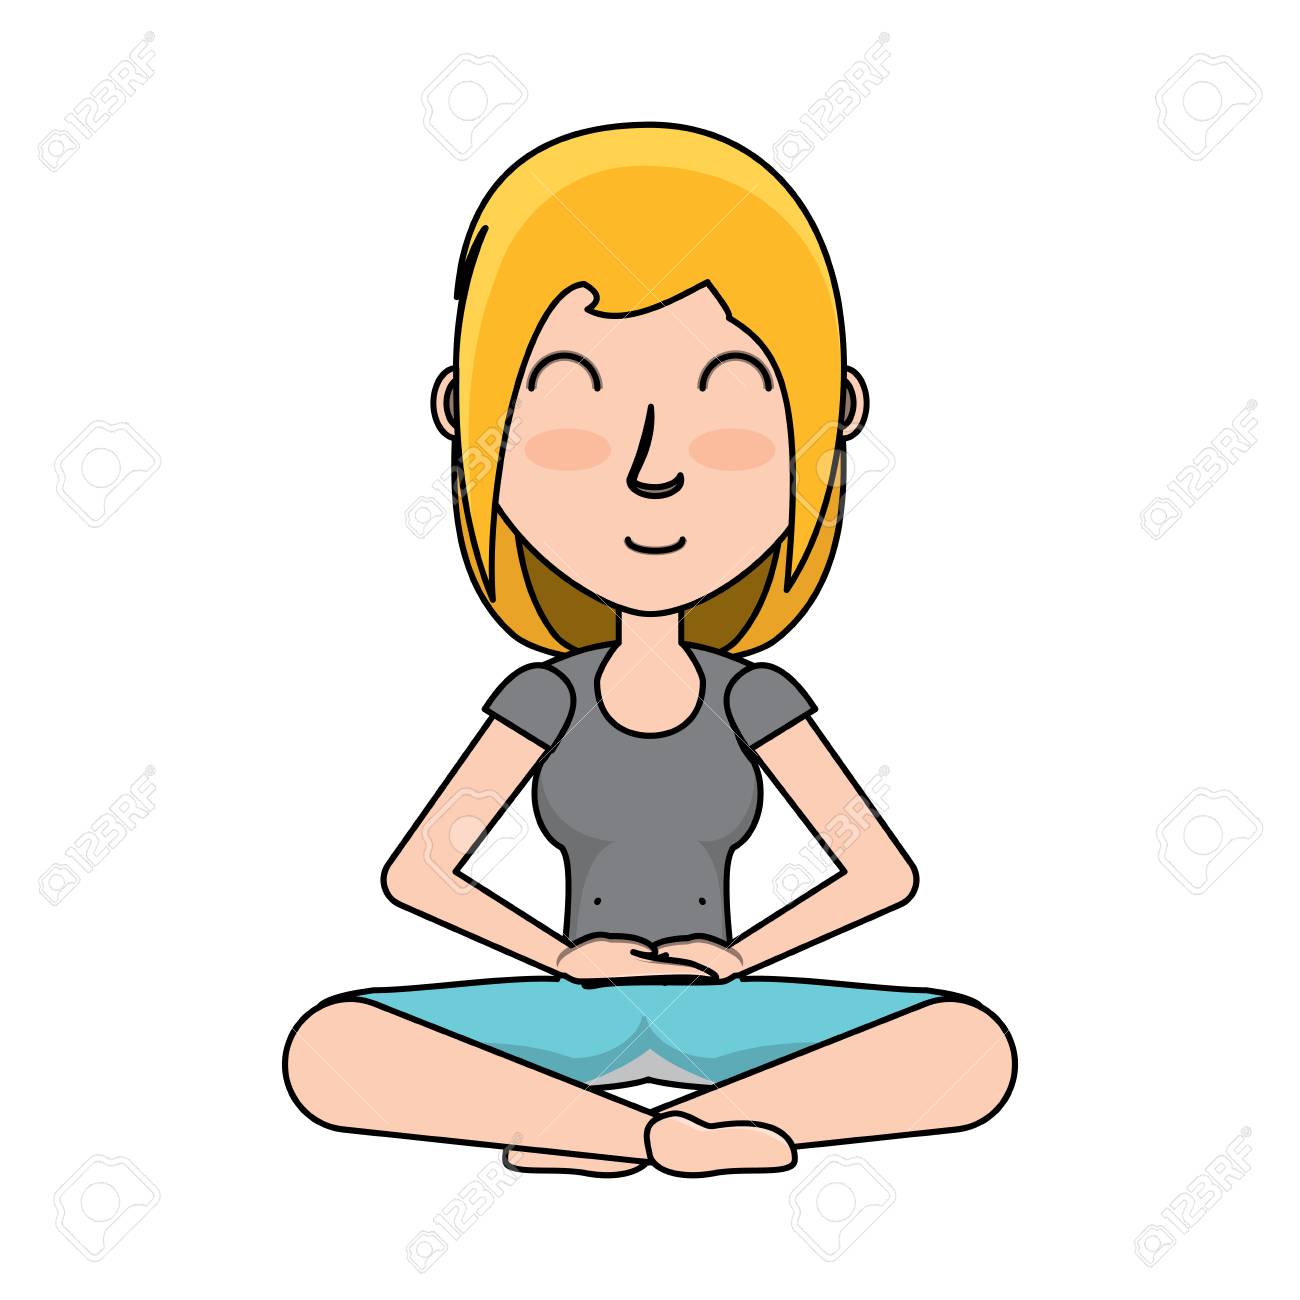 Cartoon Woman Doing Yoga With Lotus Posture Over White Background